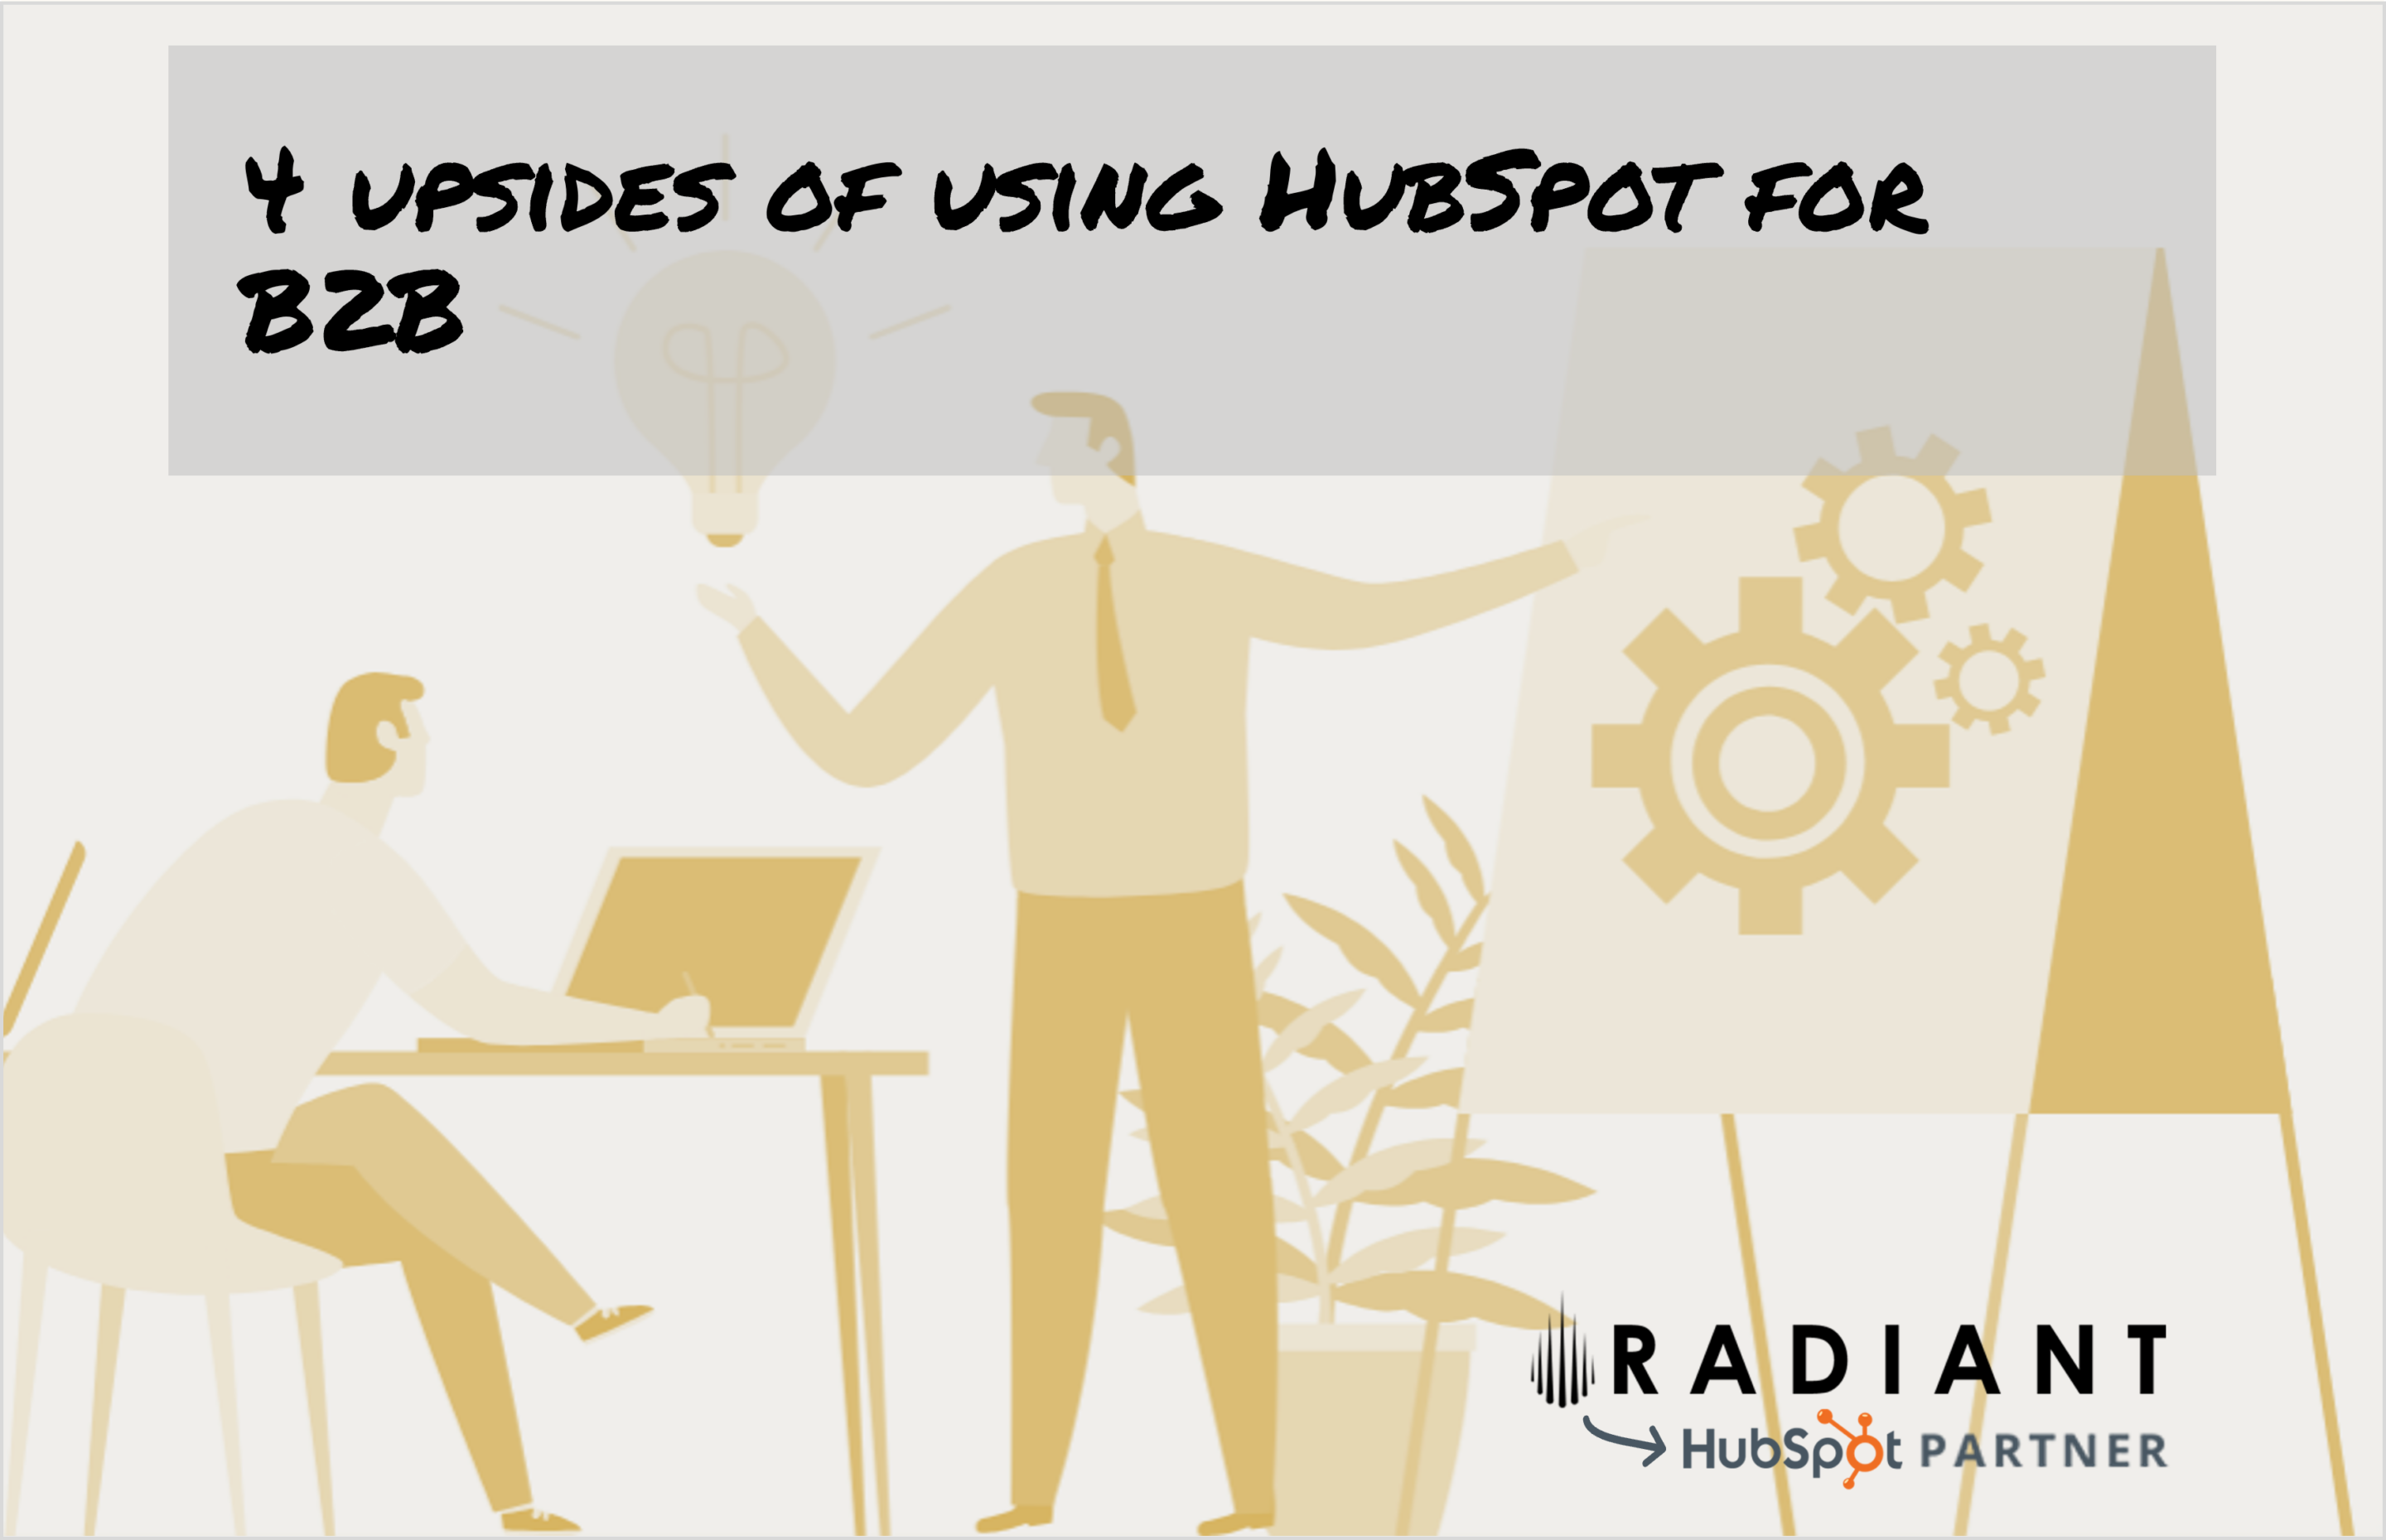 In this article we'll give you 4 upsides of using HubSpot for B2B, based on our experience as a certified HubSpot Platinum Partner.